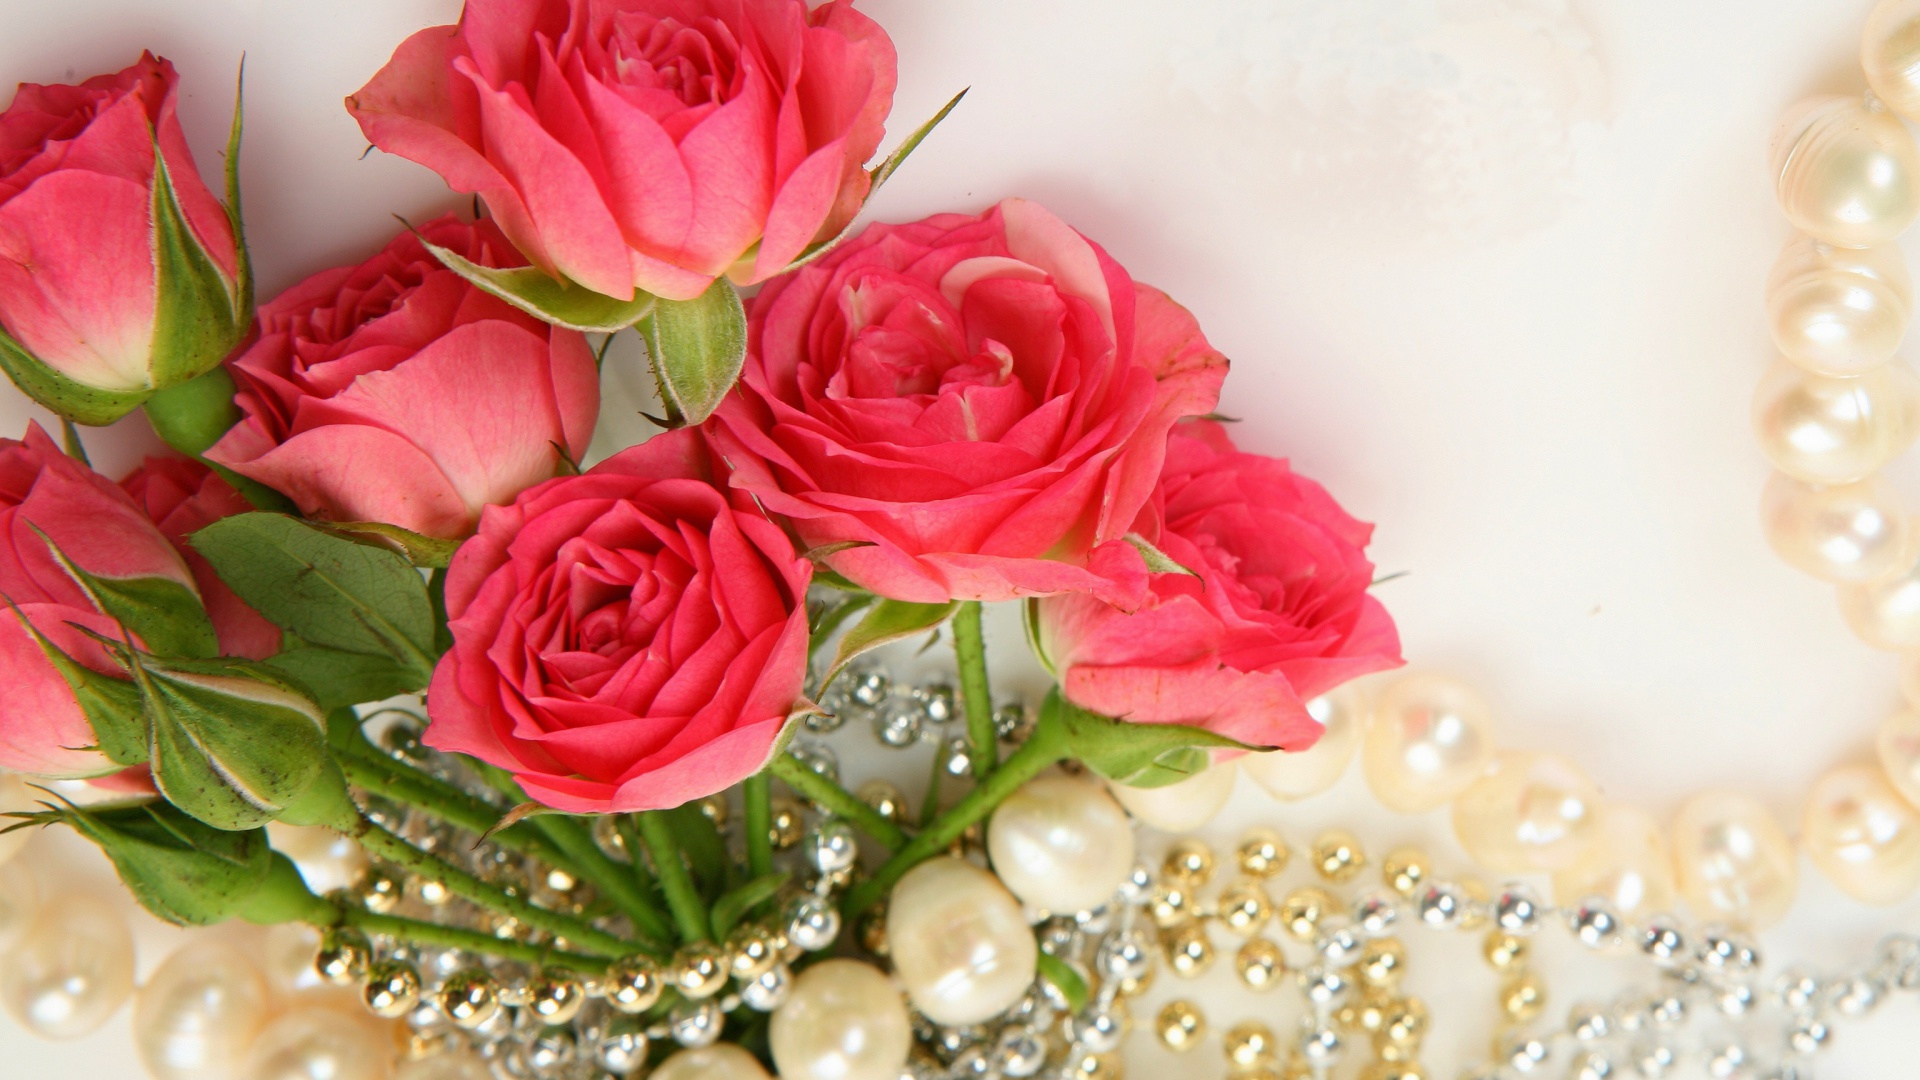 Necklace and Roses Bouquet screenshot #1 1920x1080